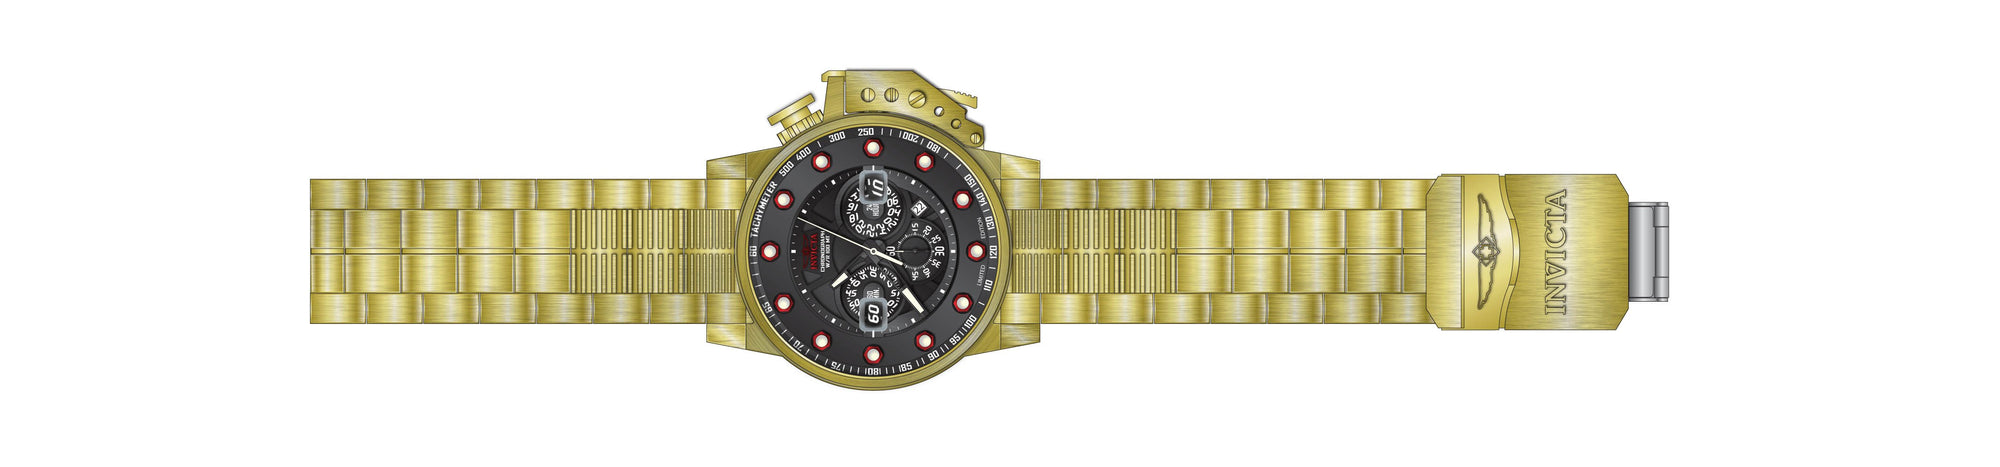 Band for Invicta I Force 30639